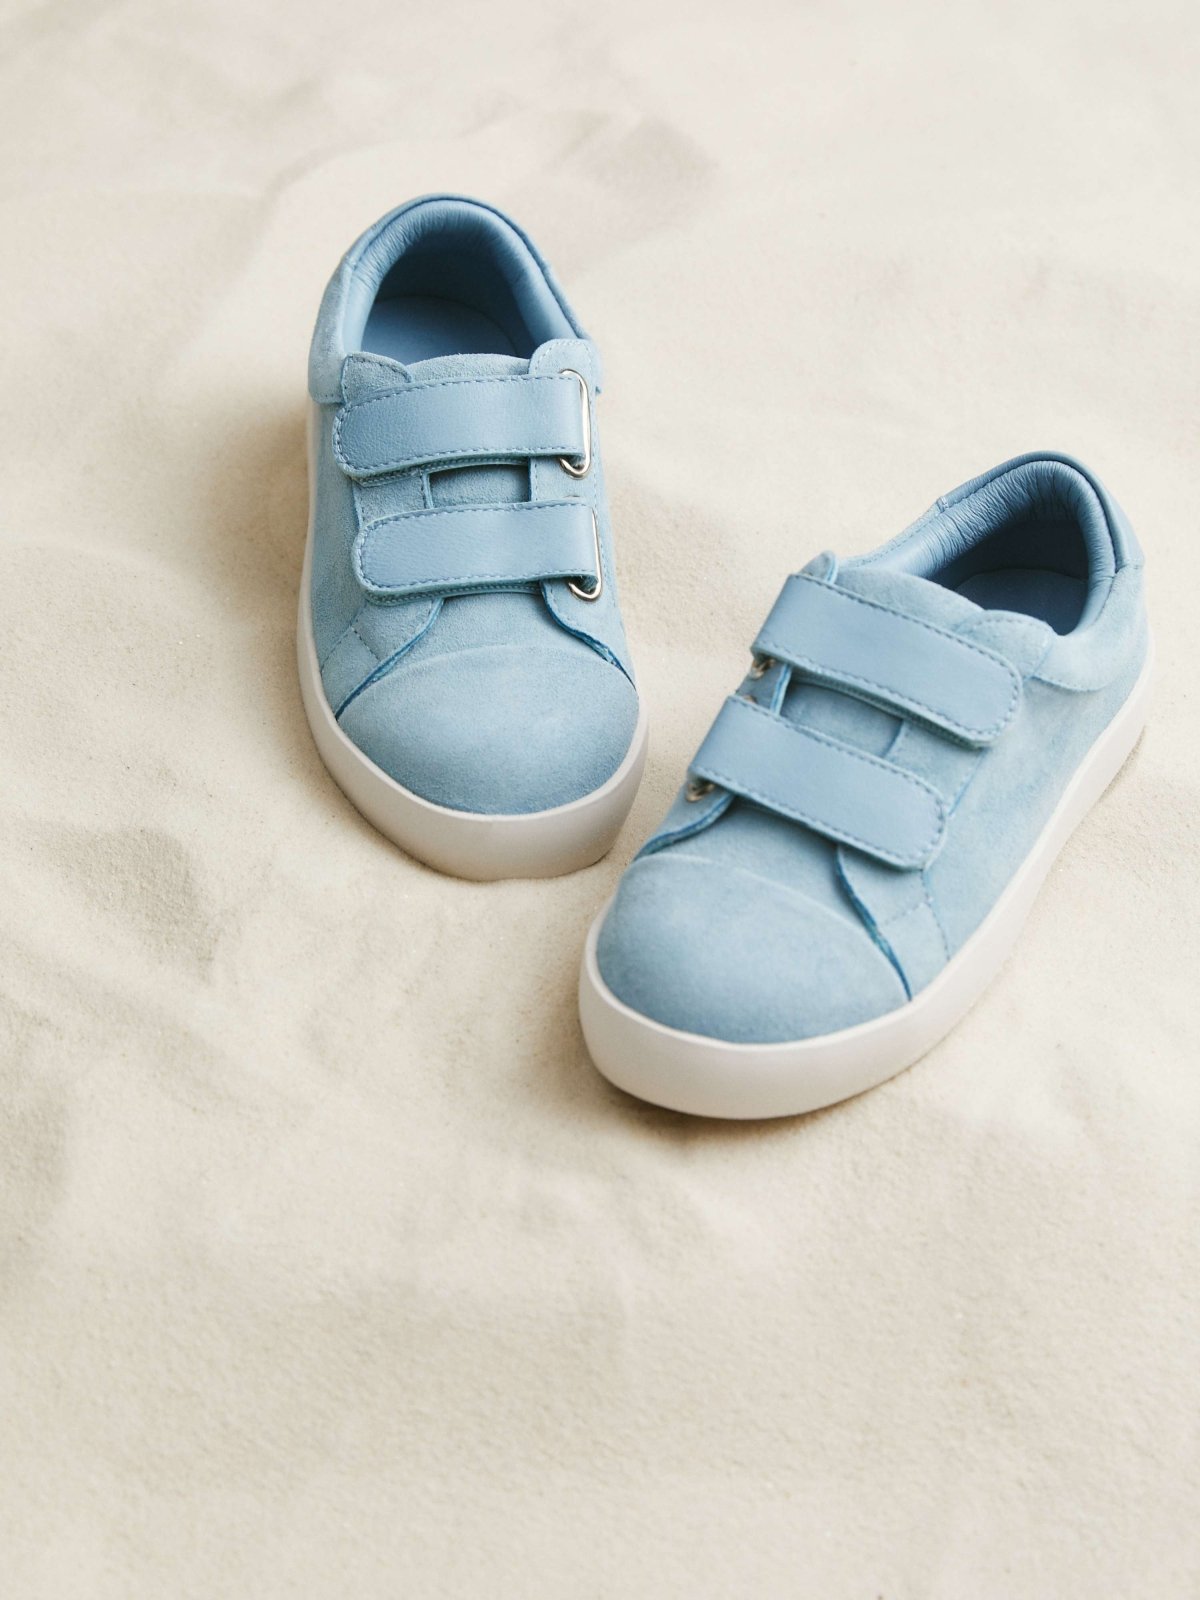 Maeve 2.0 Blue Sneakers by Age of Innocence